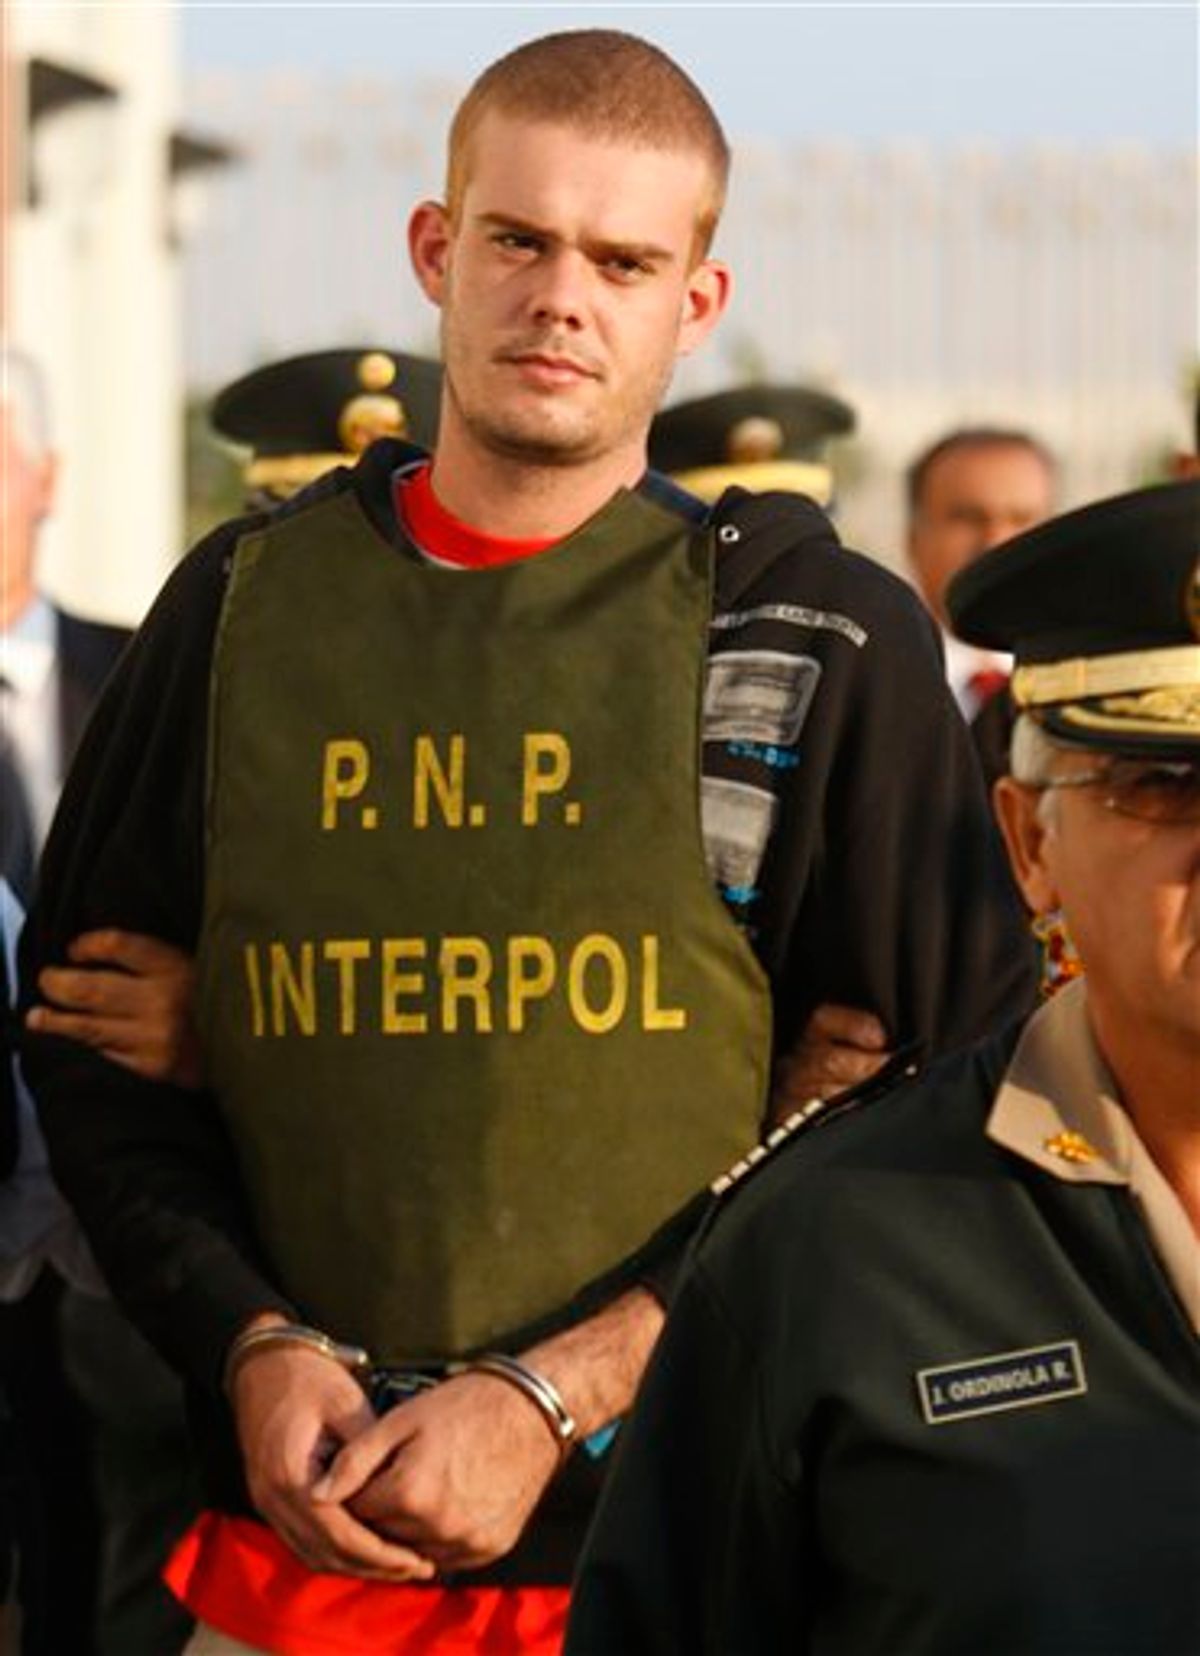 Dutch citizen Joran Van der Sloot, top, is escorted by police officers outside a Peruvian police station, near the border with Chile in Tacna, Peru, Friday, June 4, 2010. Chilean police have turned over van der Sloot,  murder suspect in Sunday's killing of 21-year-old Stephany Flores,  to Peruvian authorities at the countries' border. Van der Sloot was previously arrested in the 2005 disappearance of U.S. teen Natalee Holloway, but later released by Dutch authorities. (AP Photo/Karel Navarro) (AP)